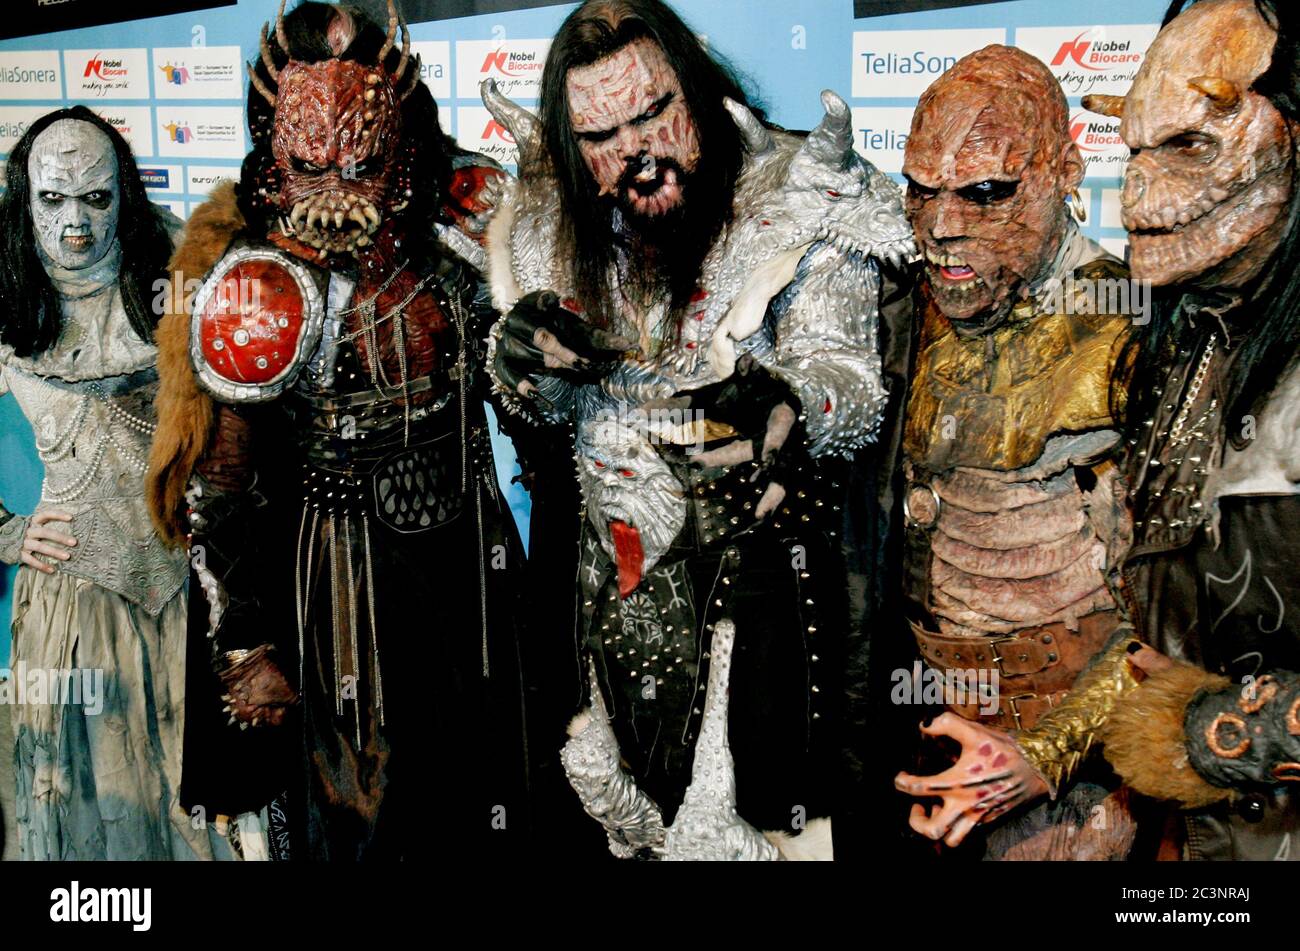 Helsinki, Finland 20070512 Press conference with the Finnish Lordi during the Eurovision Song Photo Jeppe Stock - Alamy